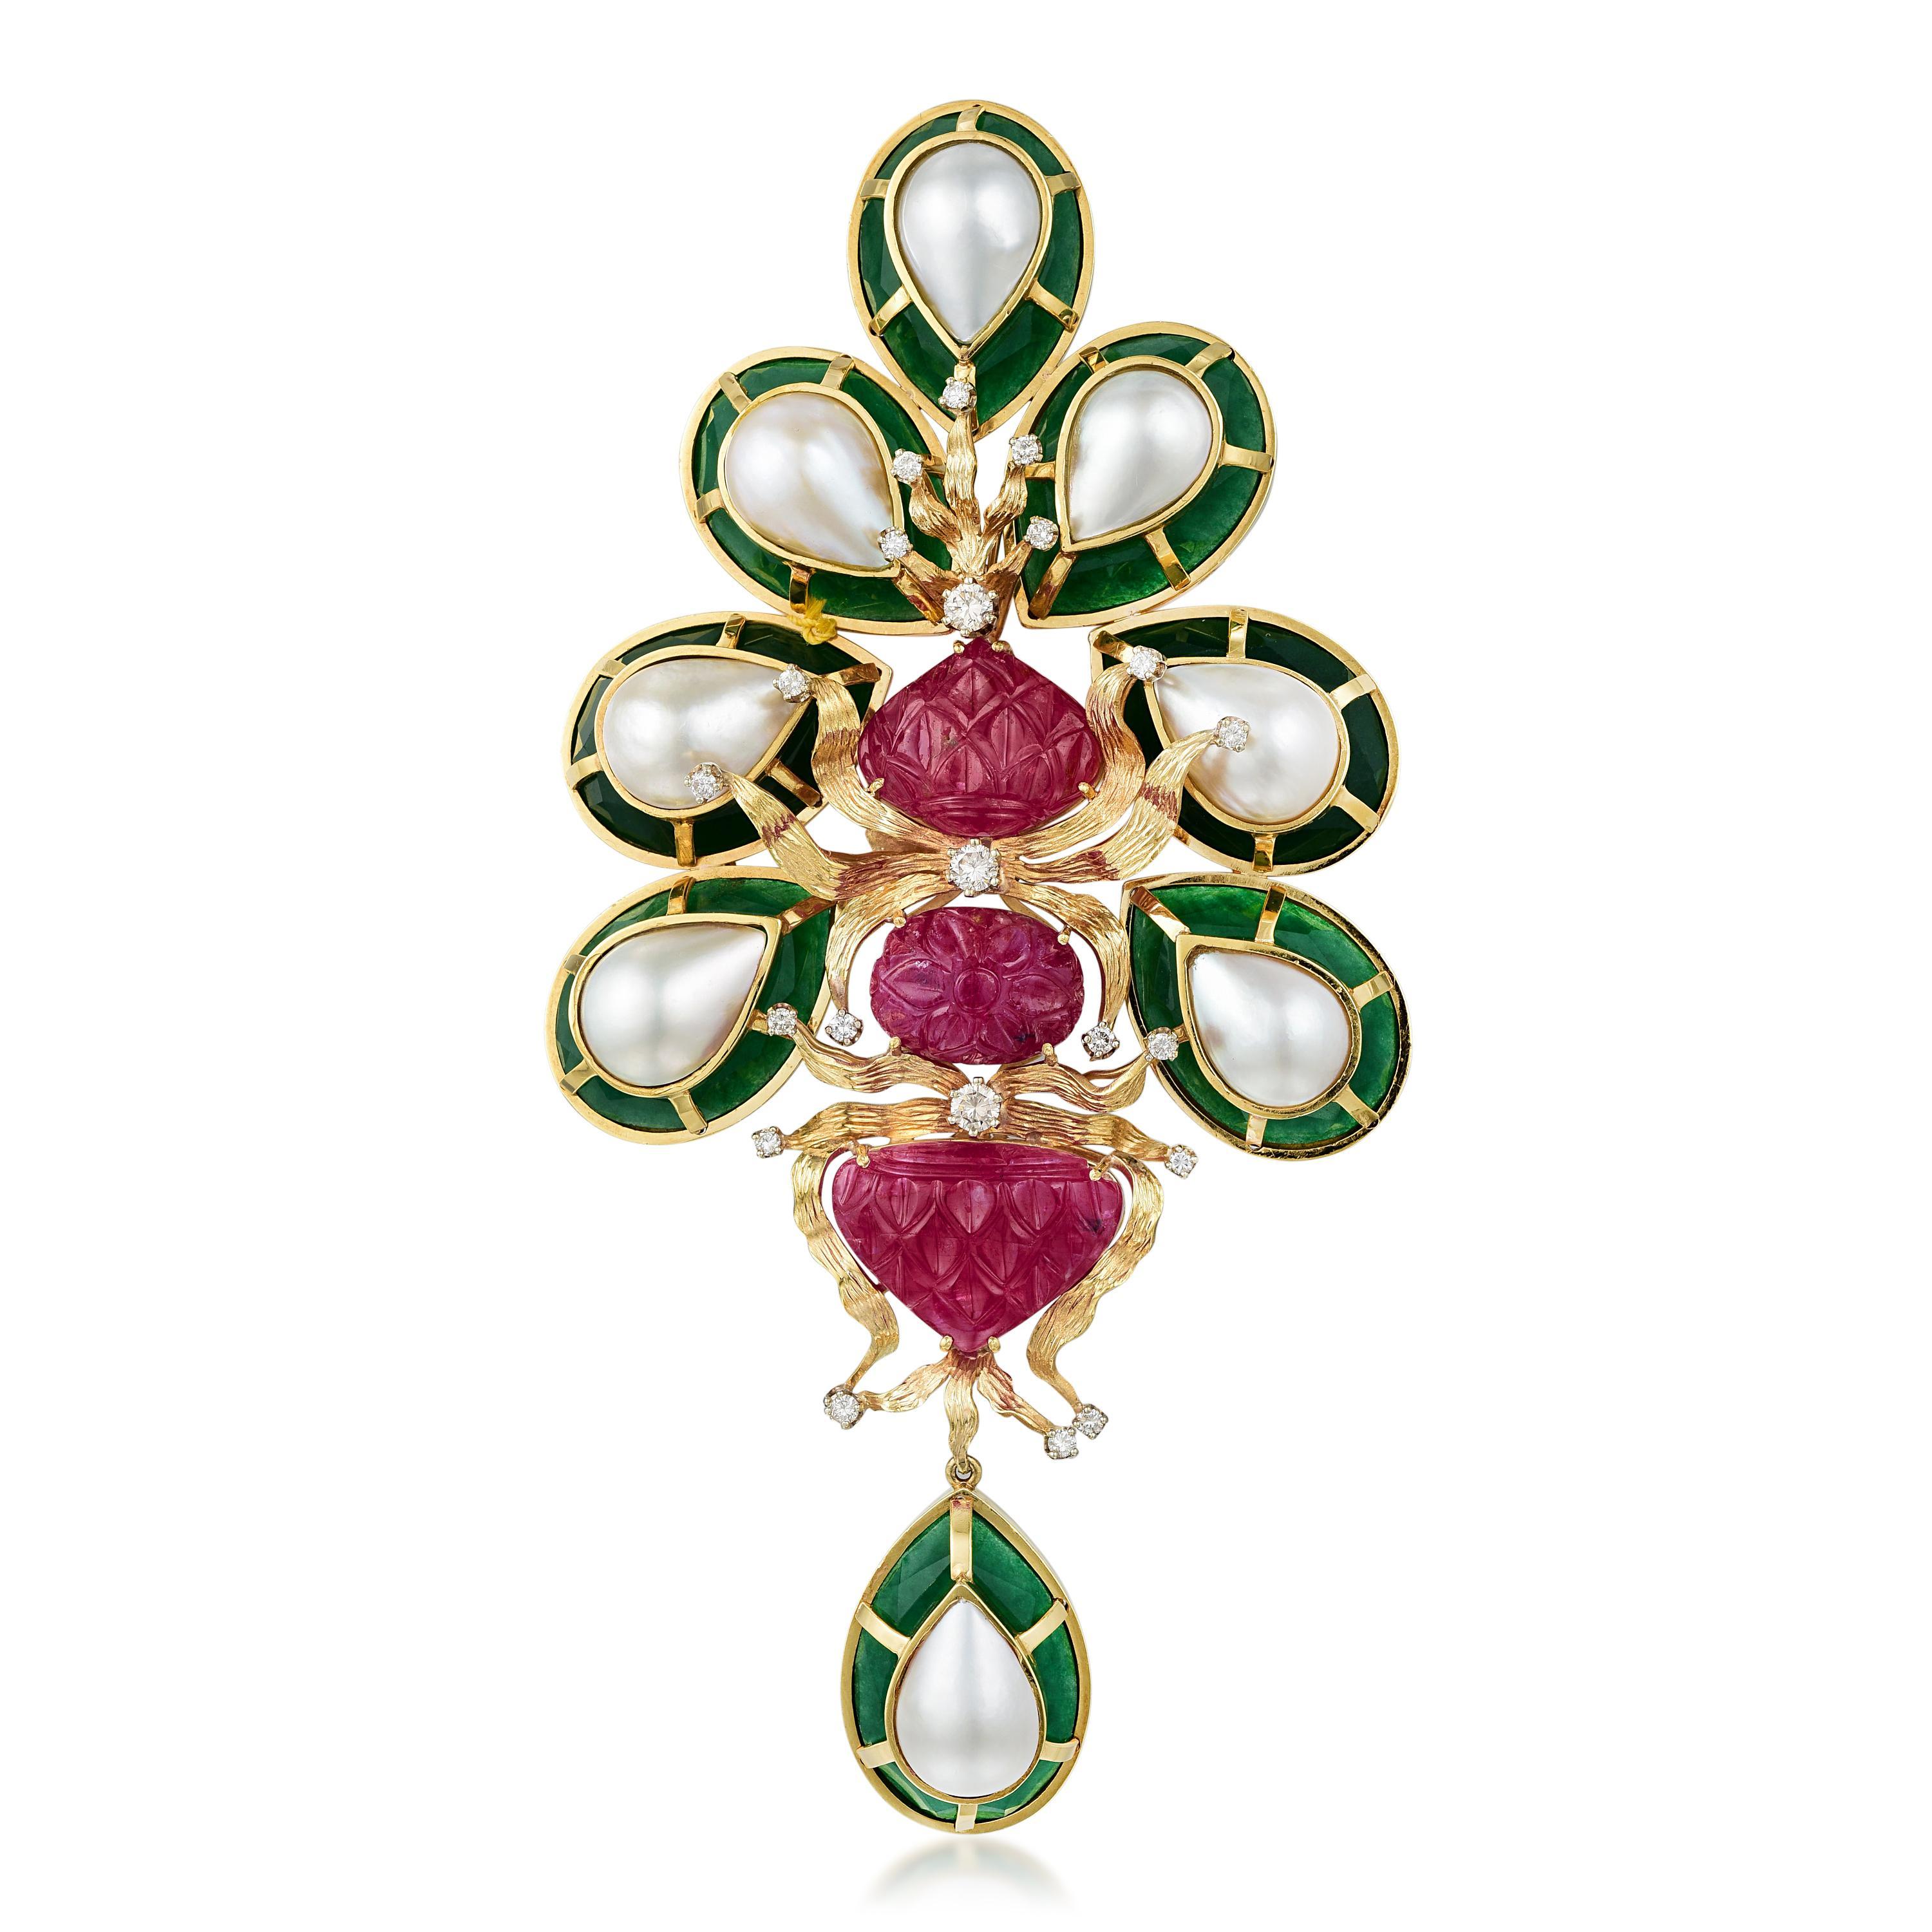 The Jewelry of Tony Duquette | Fortuna Auction NYC